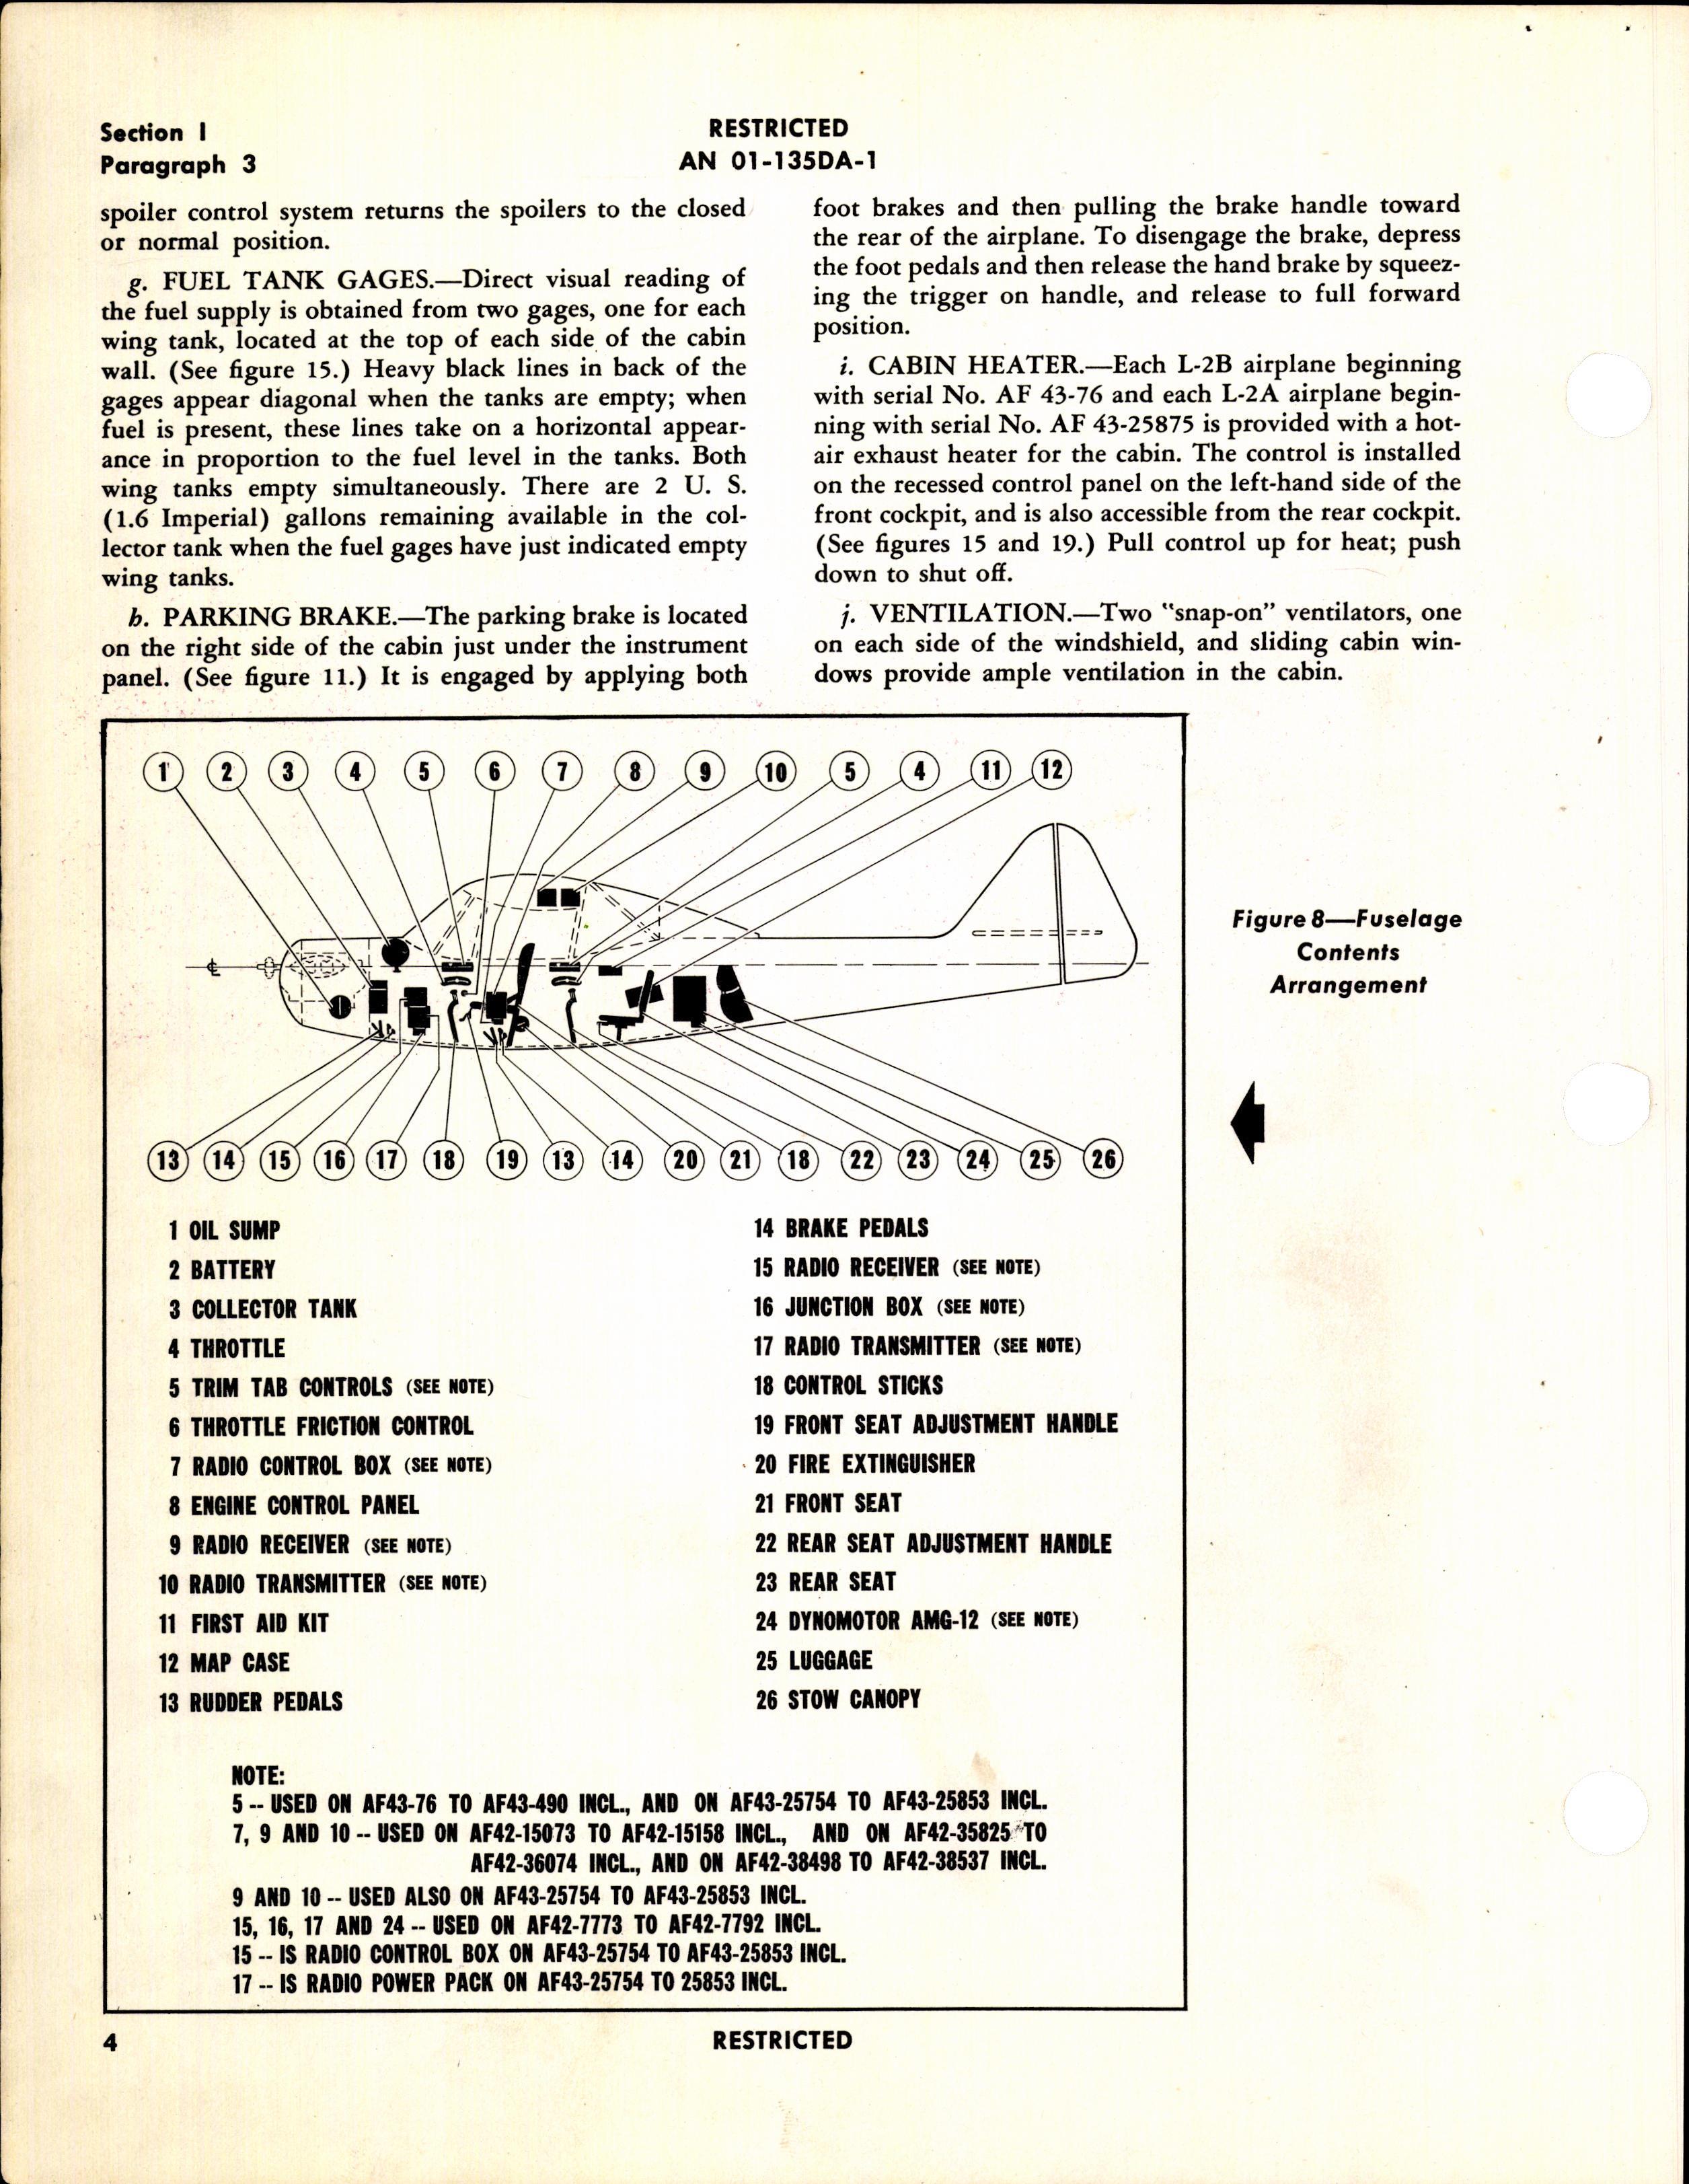 Sample page 8 from AirCorps Library document: Pilot's Flight Operating Instructions for L-2, L-2A, L-2B, and L-2M Airplanes